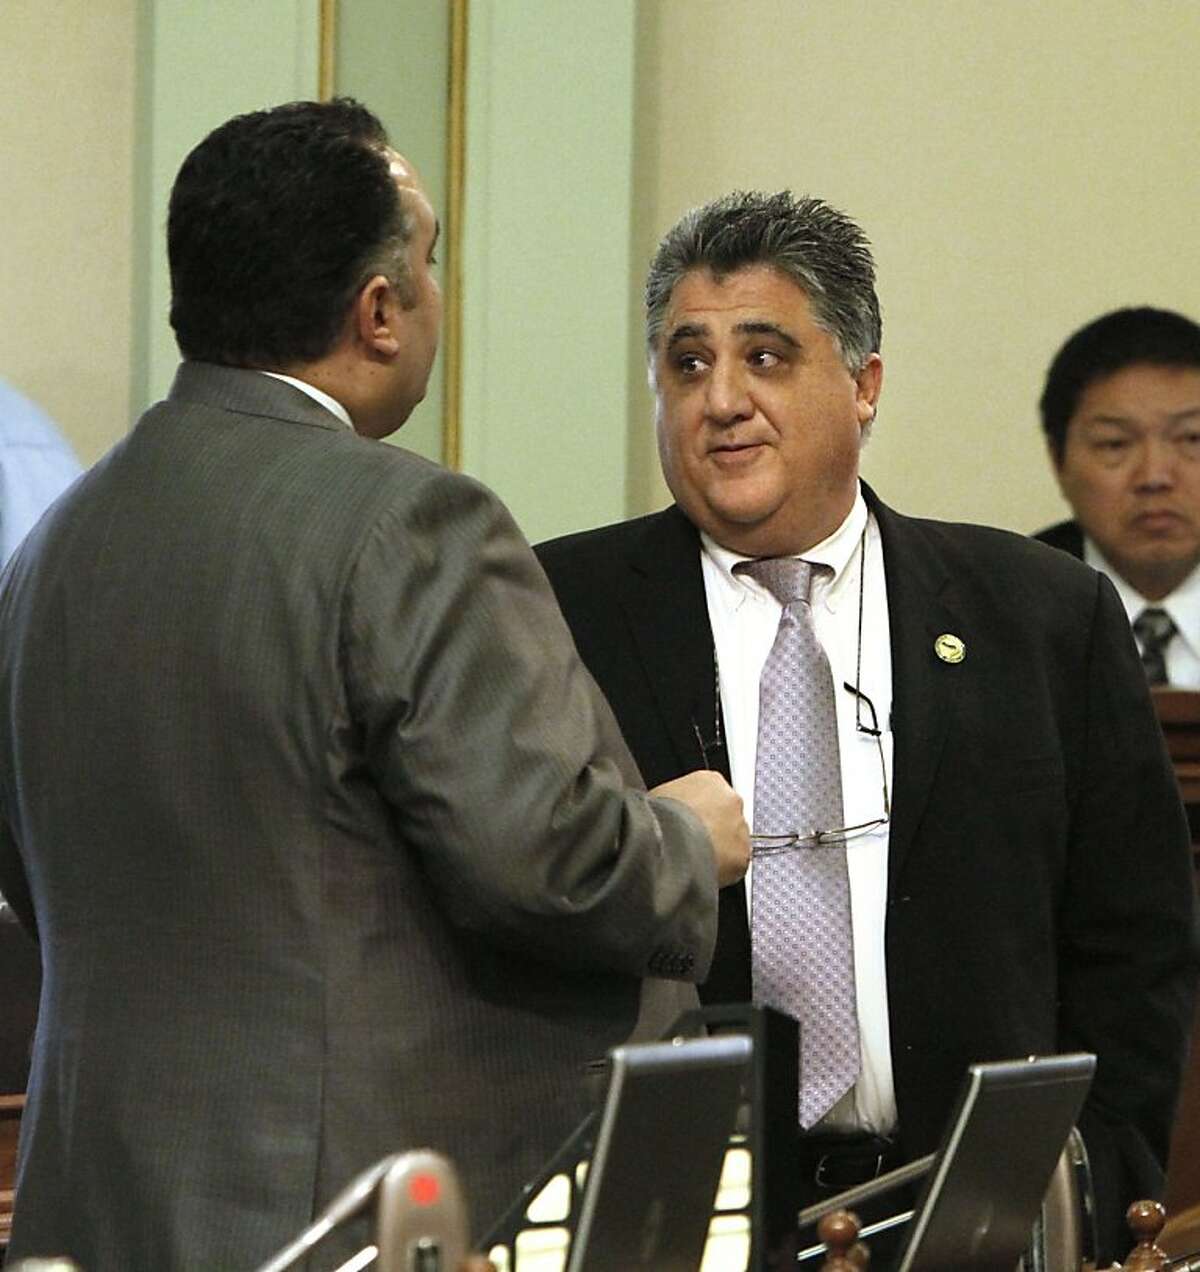 In this photo taken March 16, 2011, Assemblyman Anthony Portantino, D- La Canada Flintridge, right, talks with Assembly Speaker John Perez, D-Los Angeles, during a debate over the state budget at the Capitol in Sacramento. Portantino said his bill to push back school start times at middle and high schools in the state is dead for the year after intense lobbying against the measure in recent days.